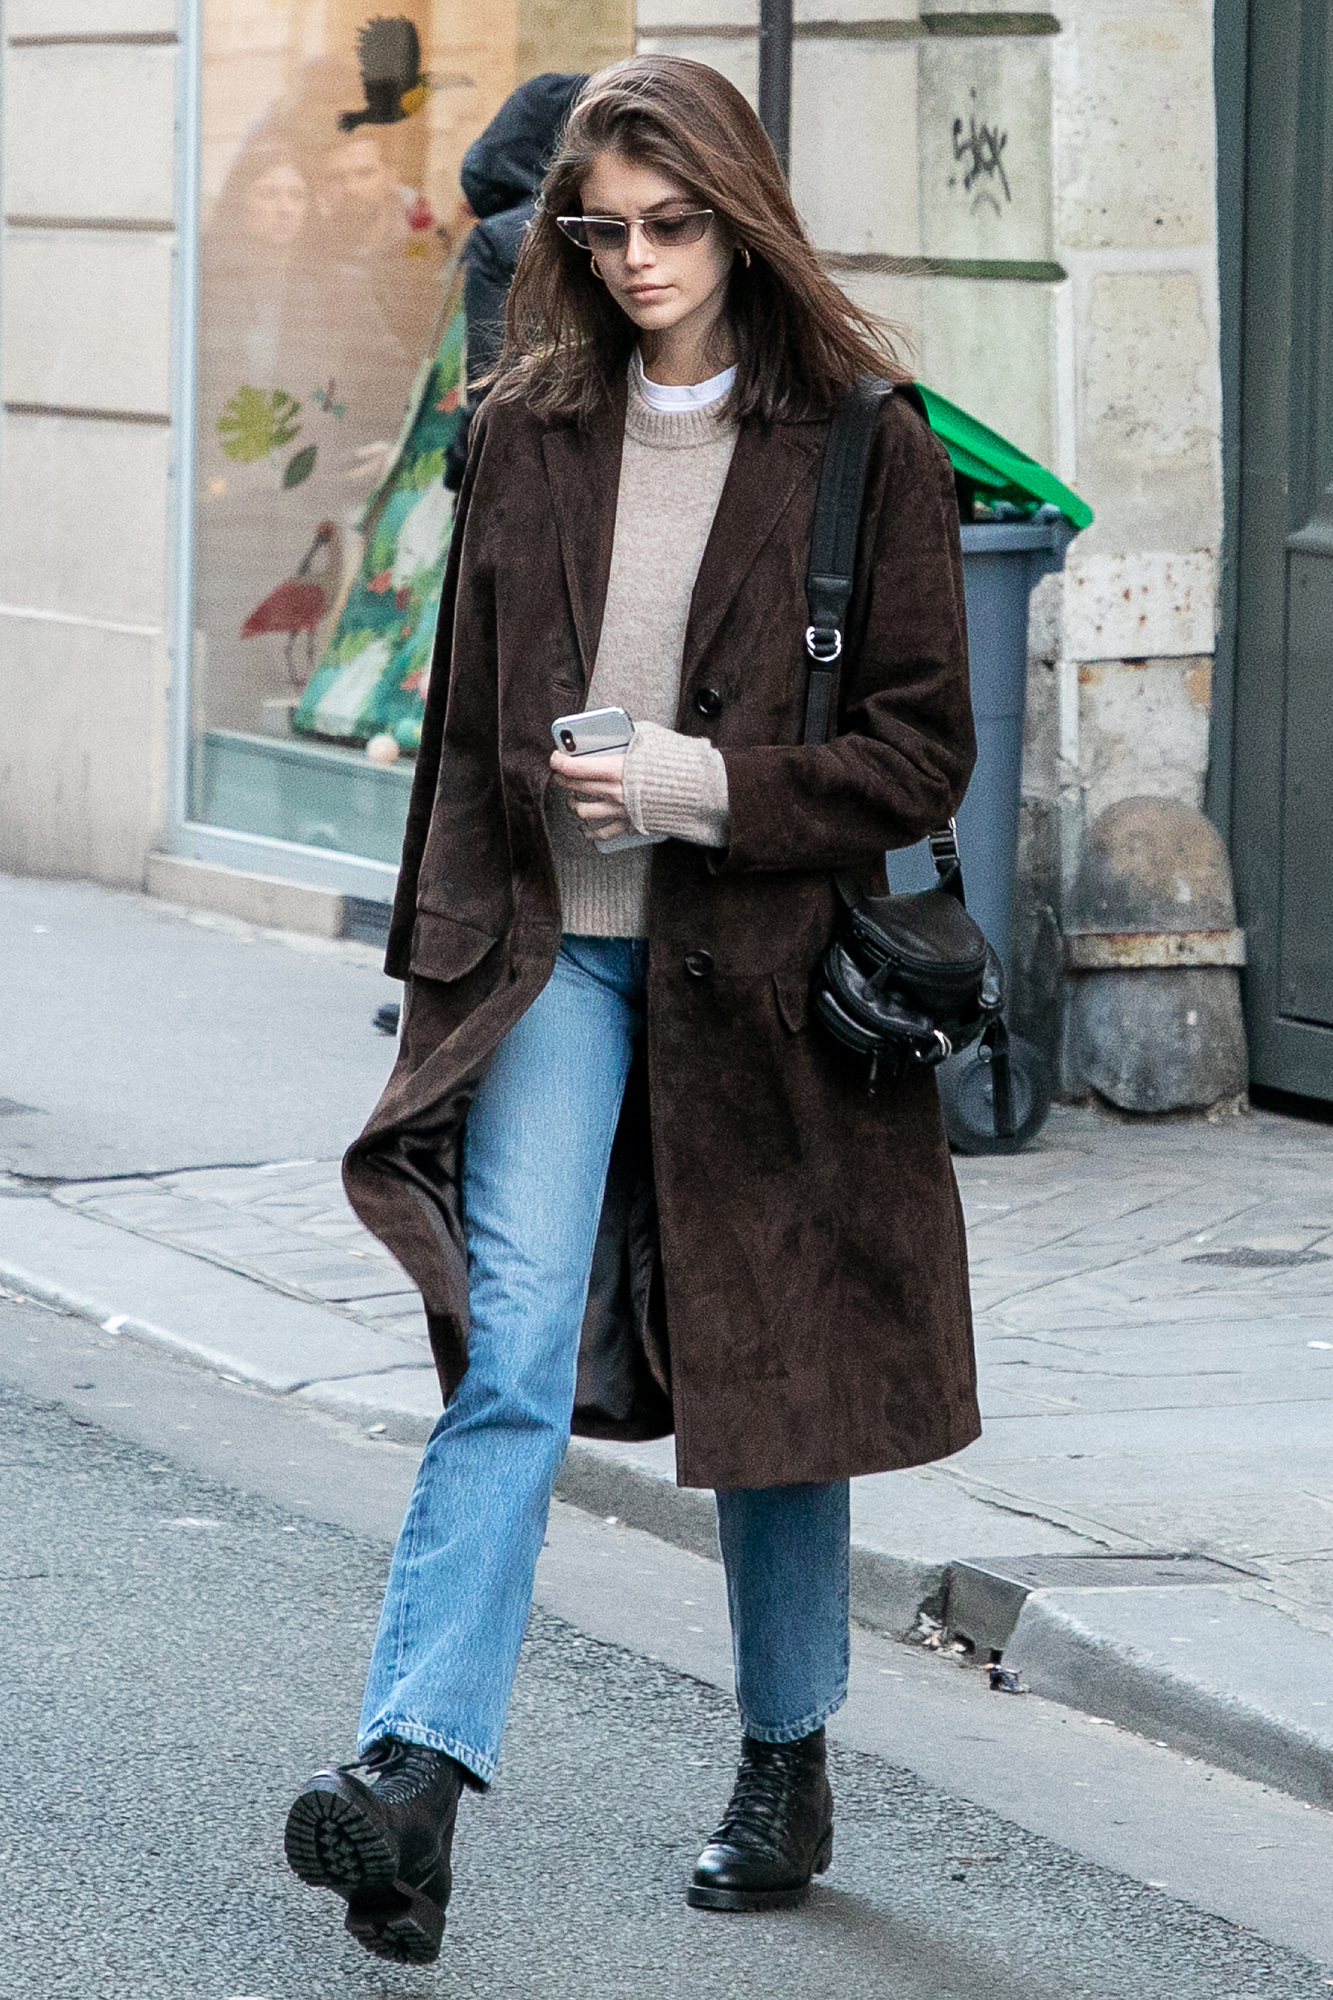 Stylish Outfits For Cold Weather, According To Celebs